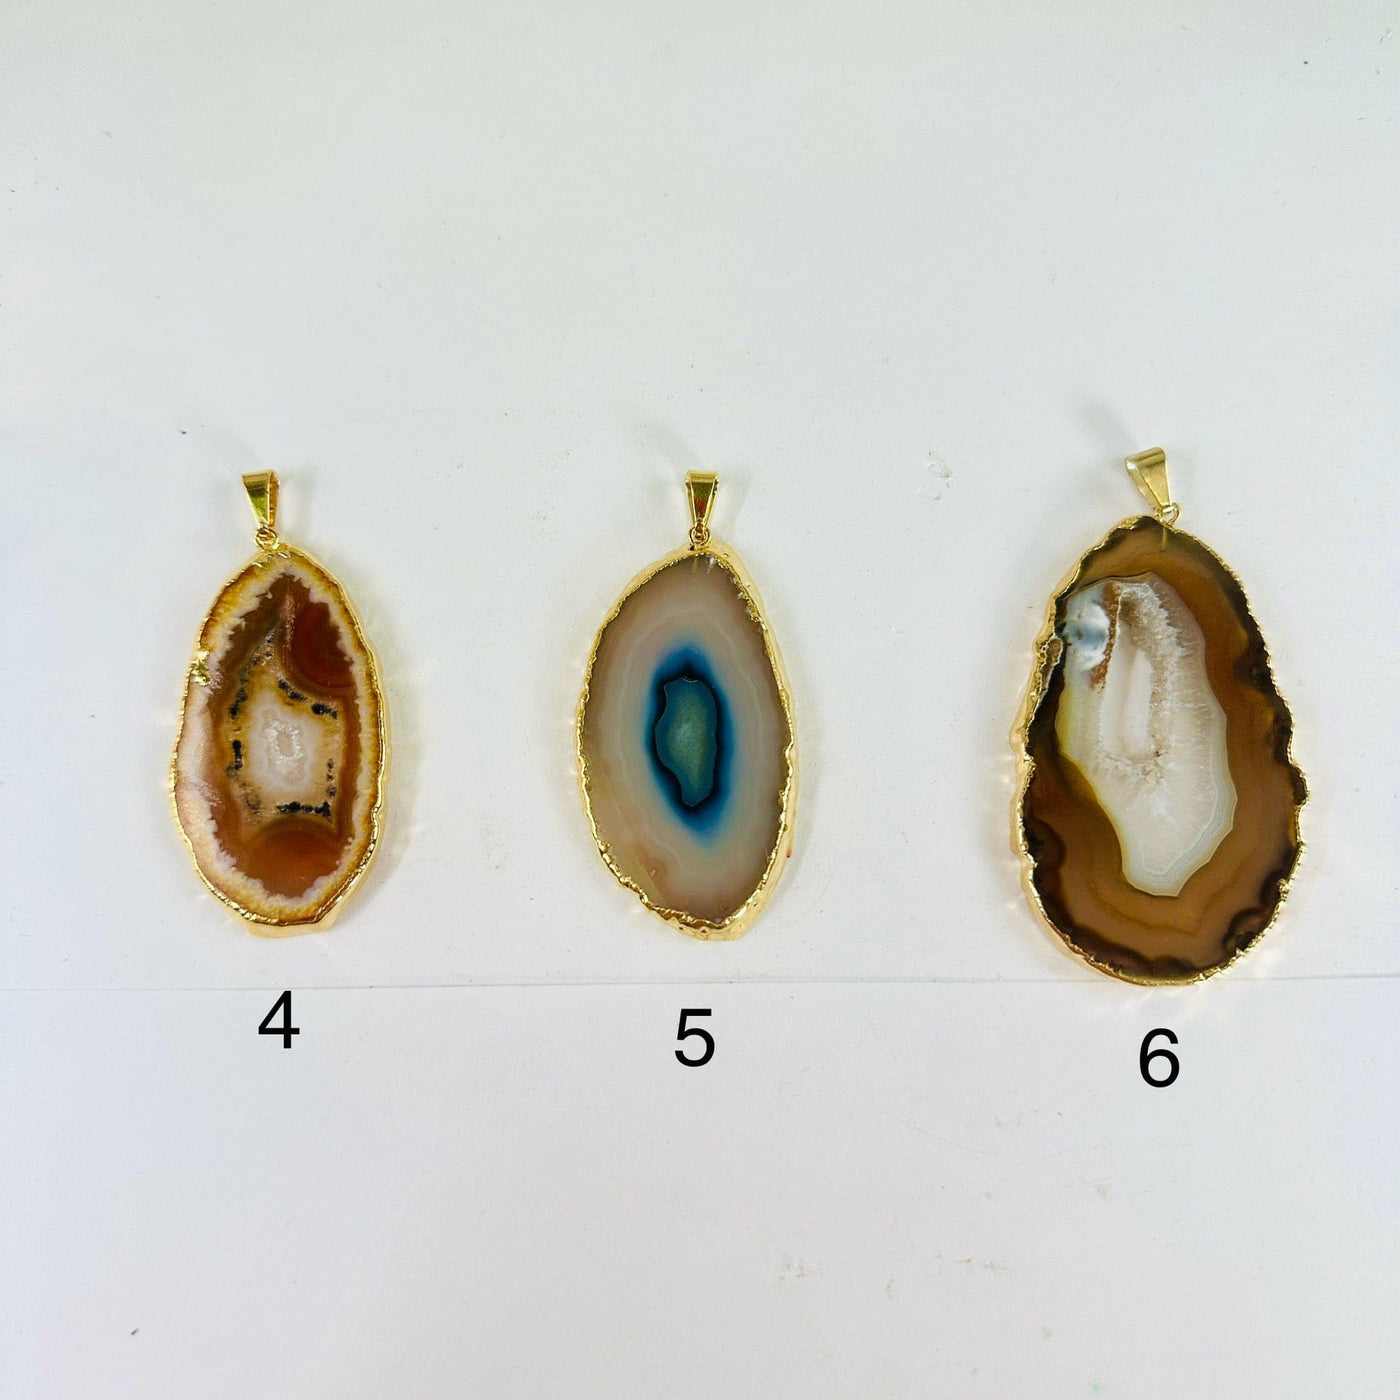 Agate Slice - Gold Electroplated Pendant with Gold Bail - You Choose pendants 4 5 6 labeled